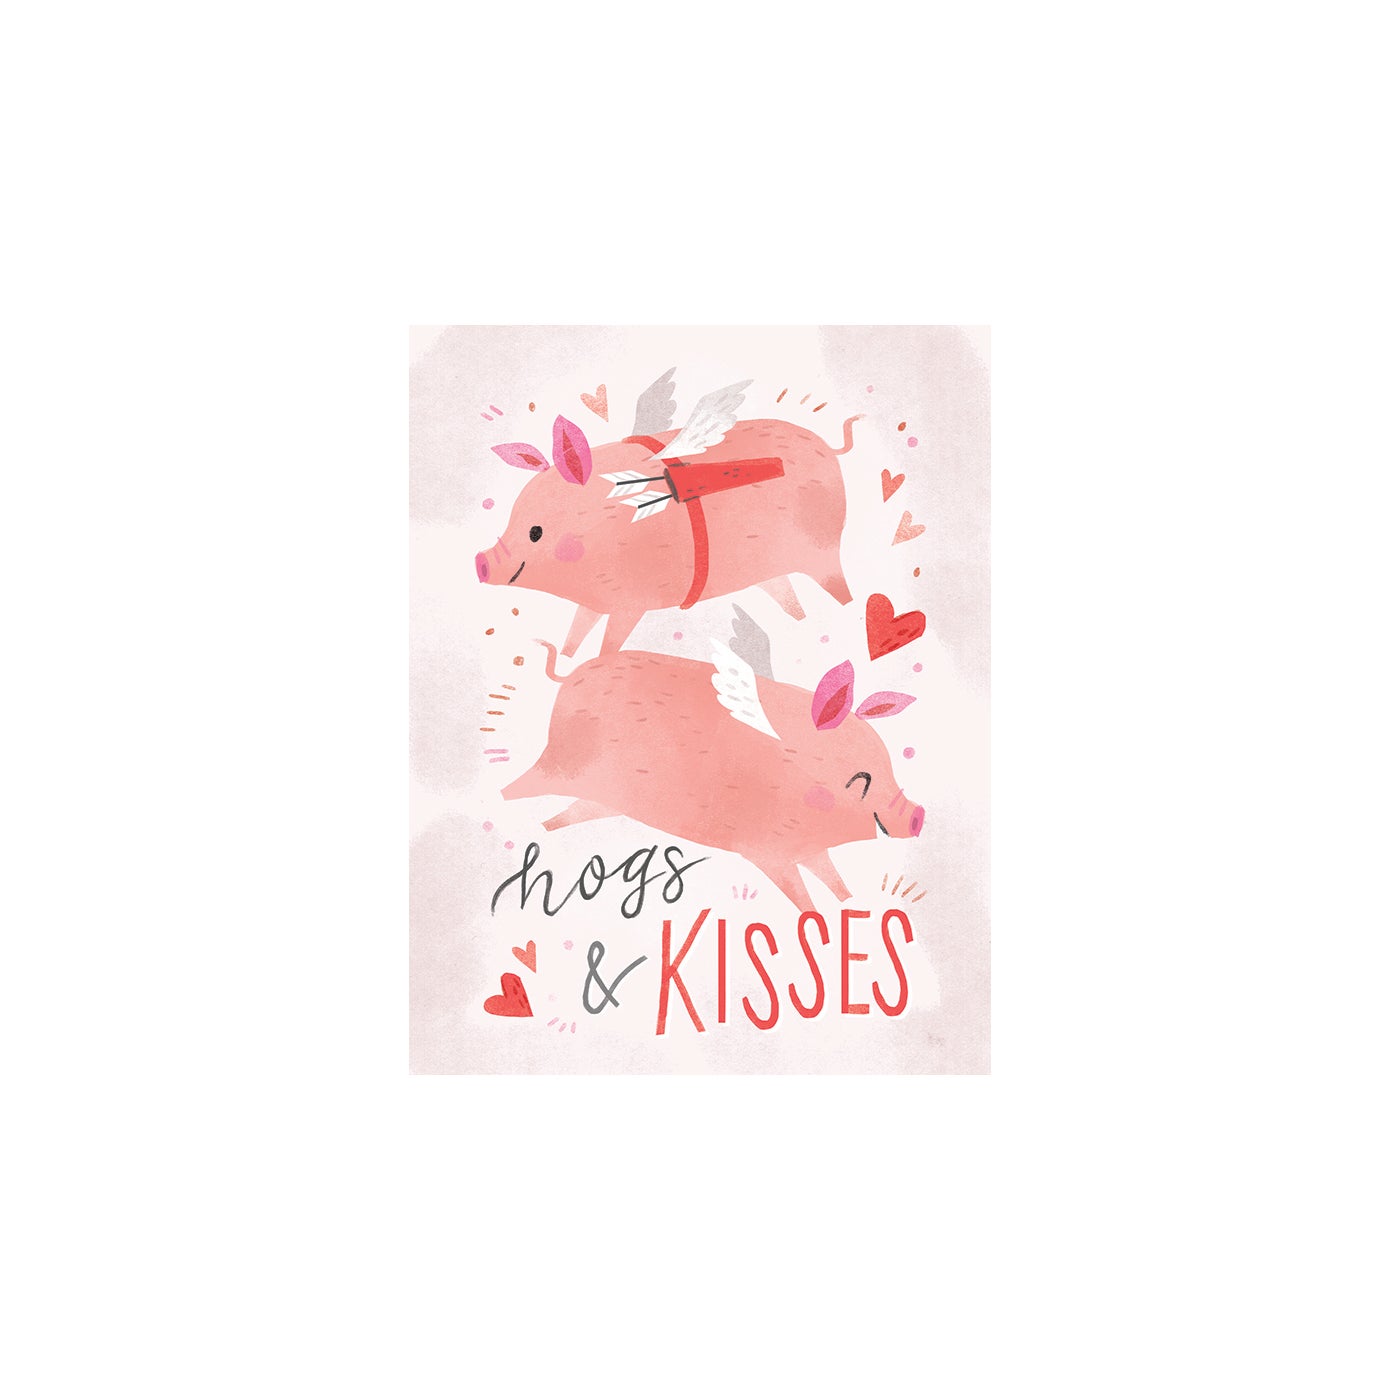 Hogs and Kisses Valentine Cards